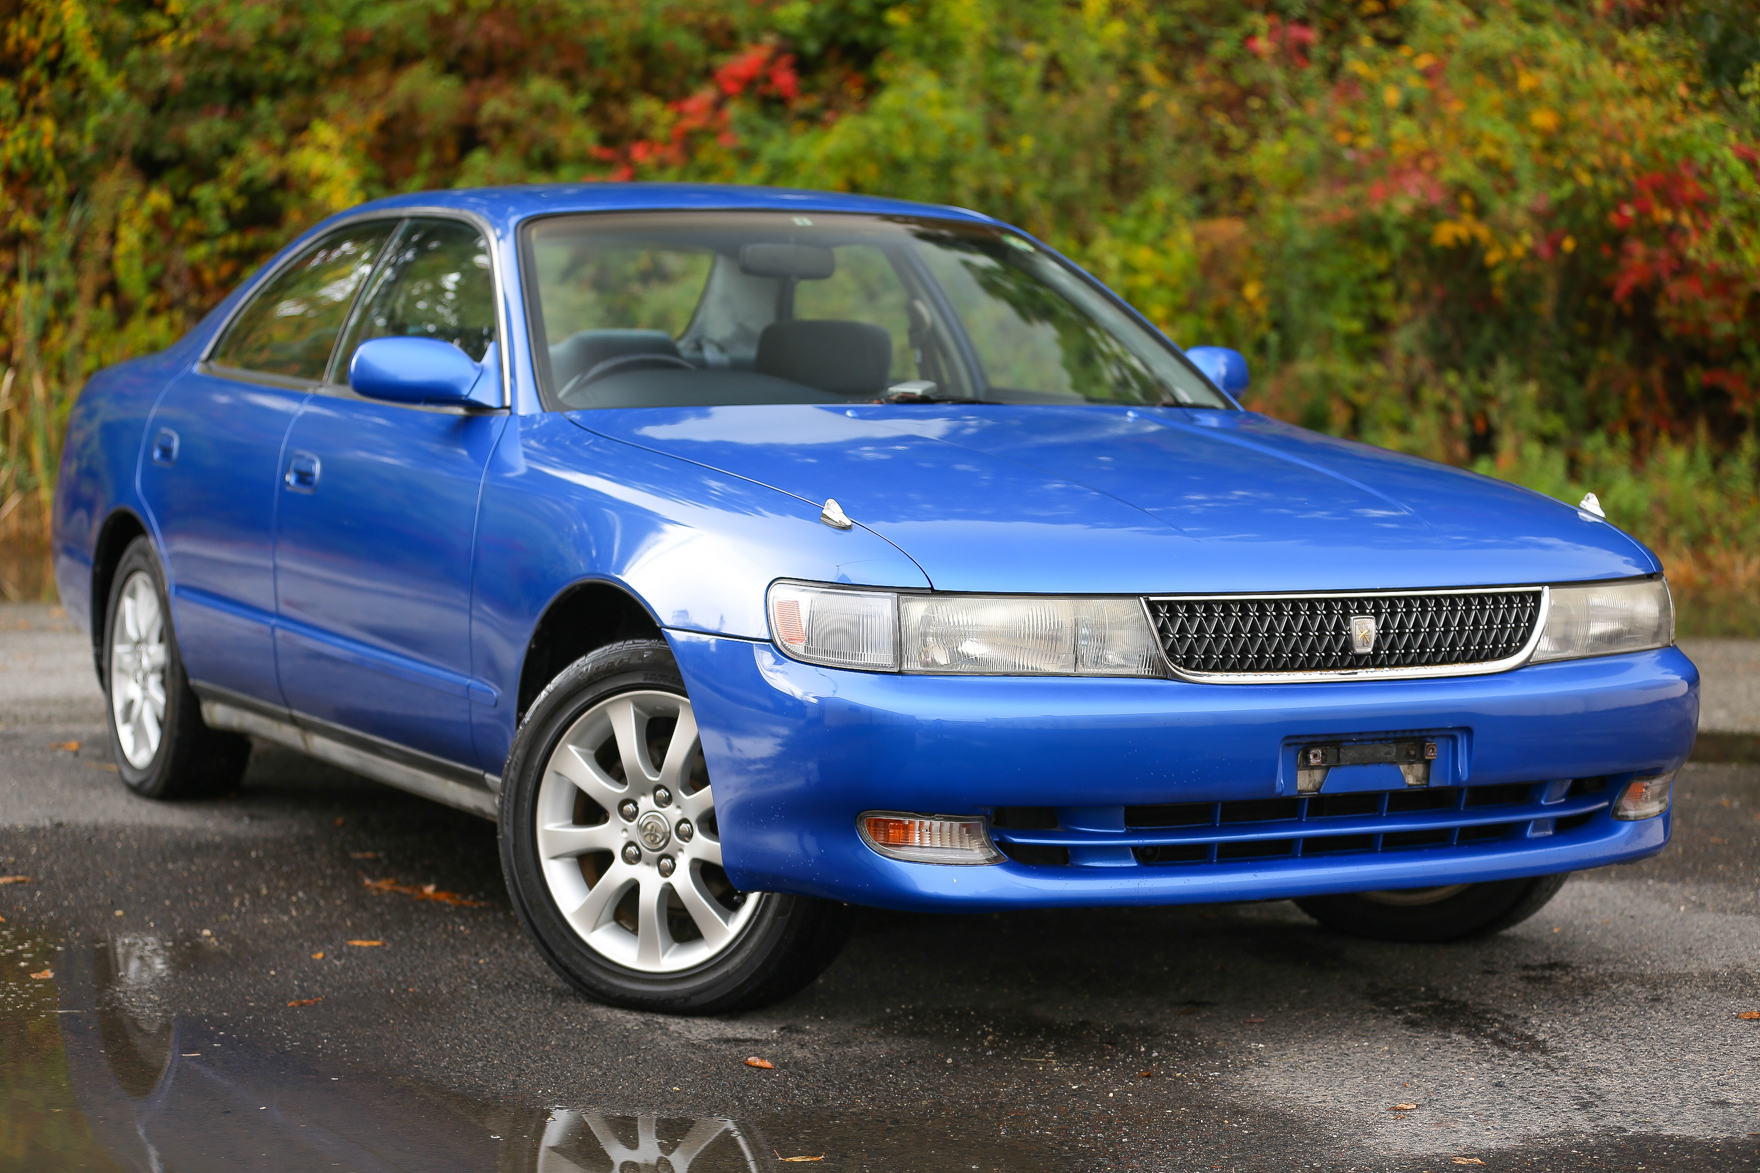 1993 Toyota Chaser - Available for $9,550